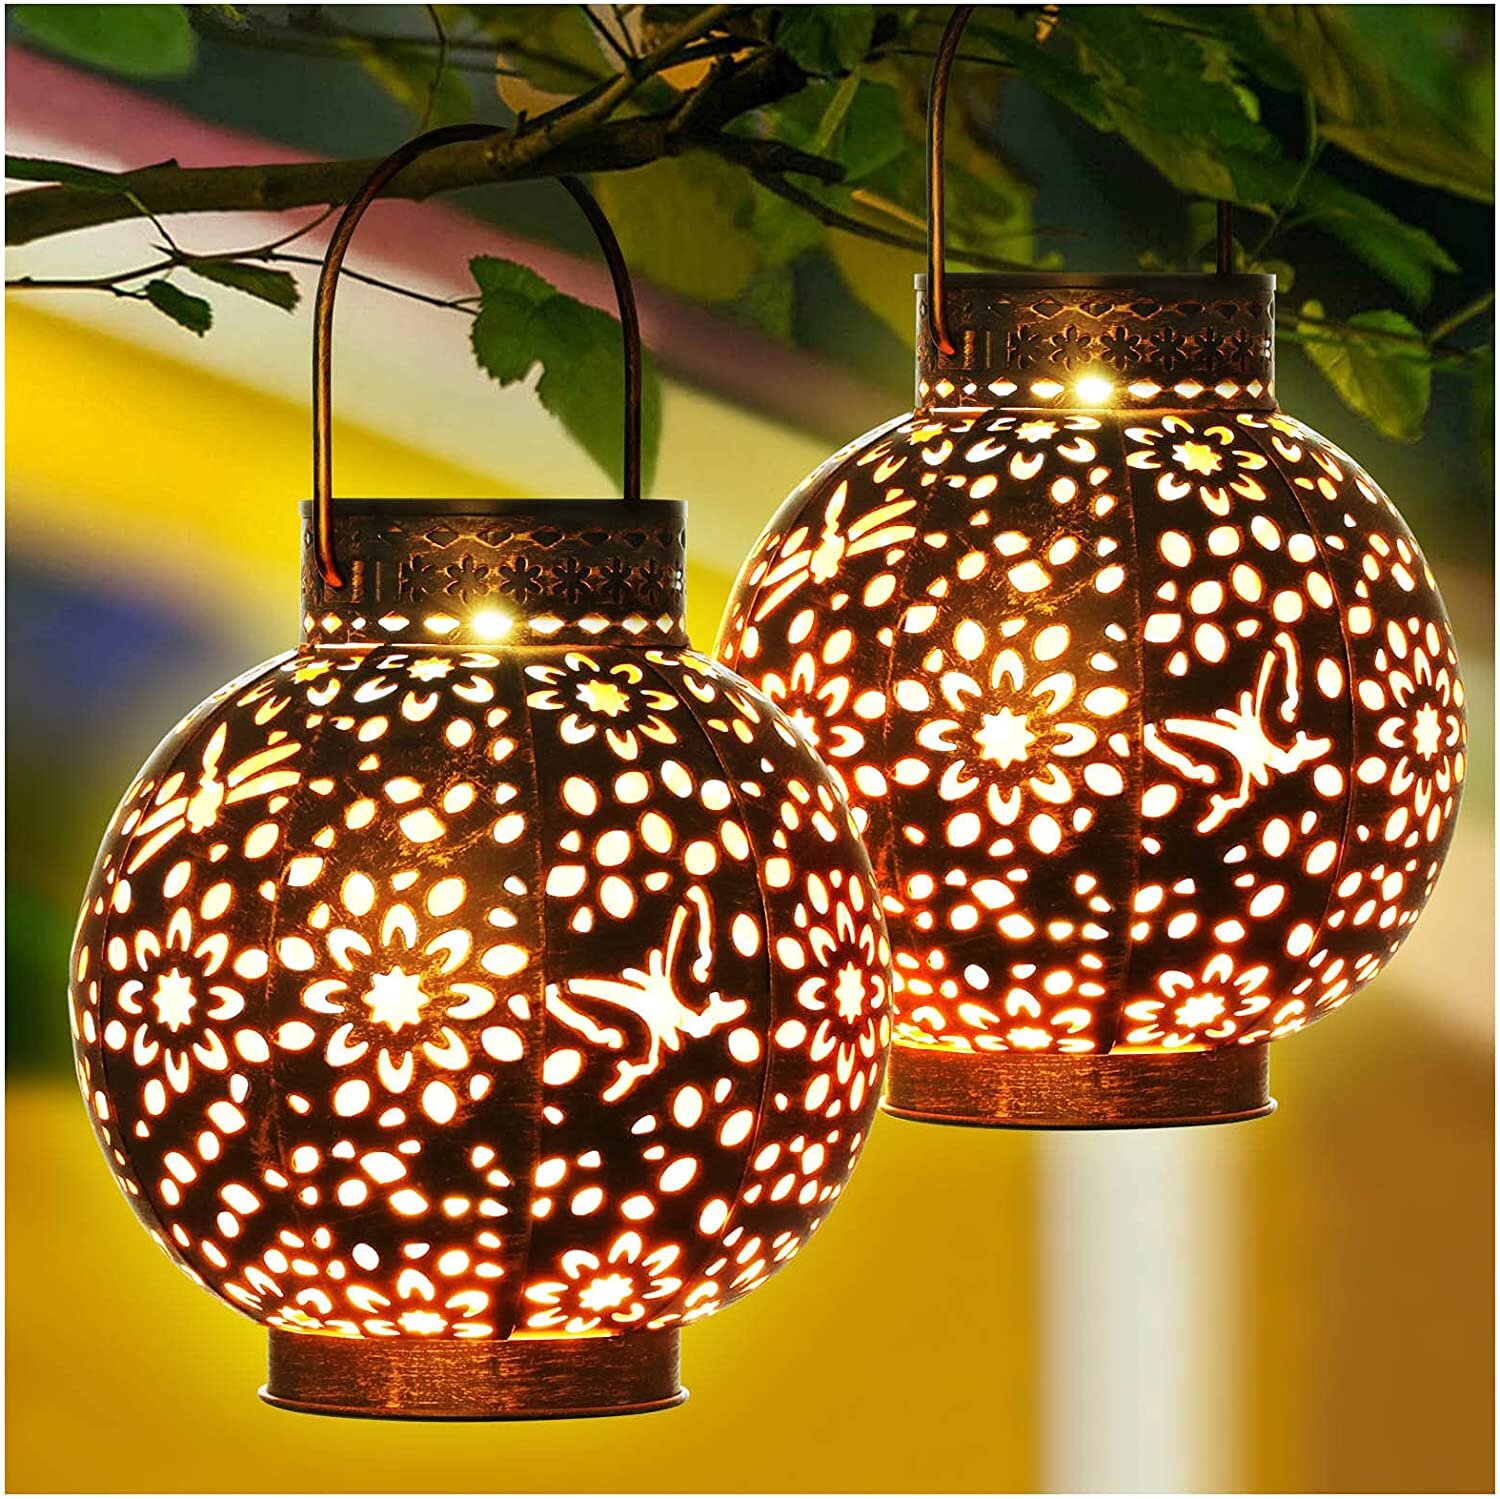 Details about   Retro Solar Lantern Hanging Light LED Candle Outdoor Yard Garden Lamp Waterproof 